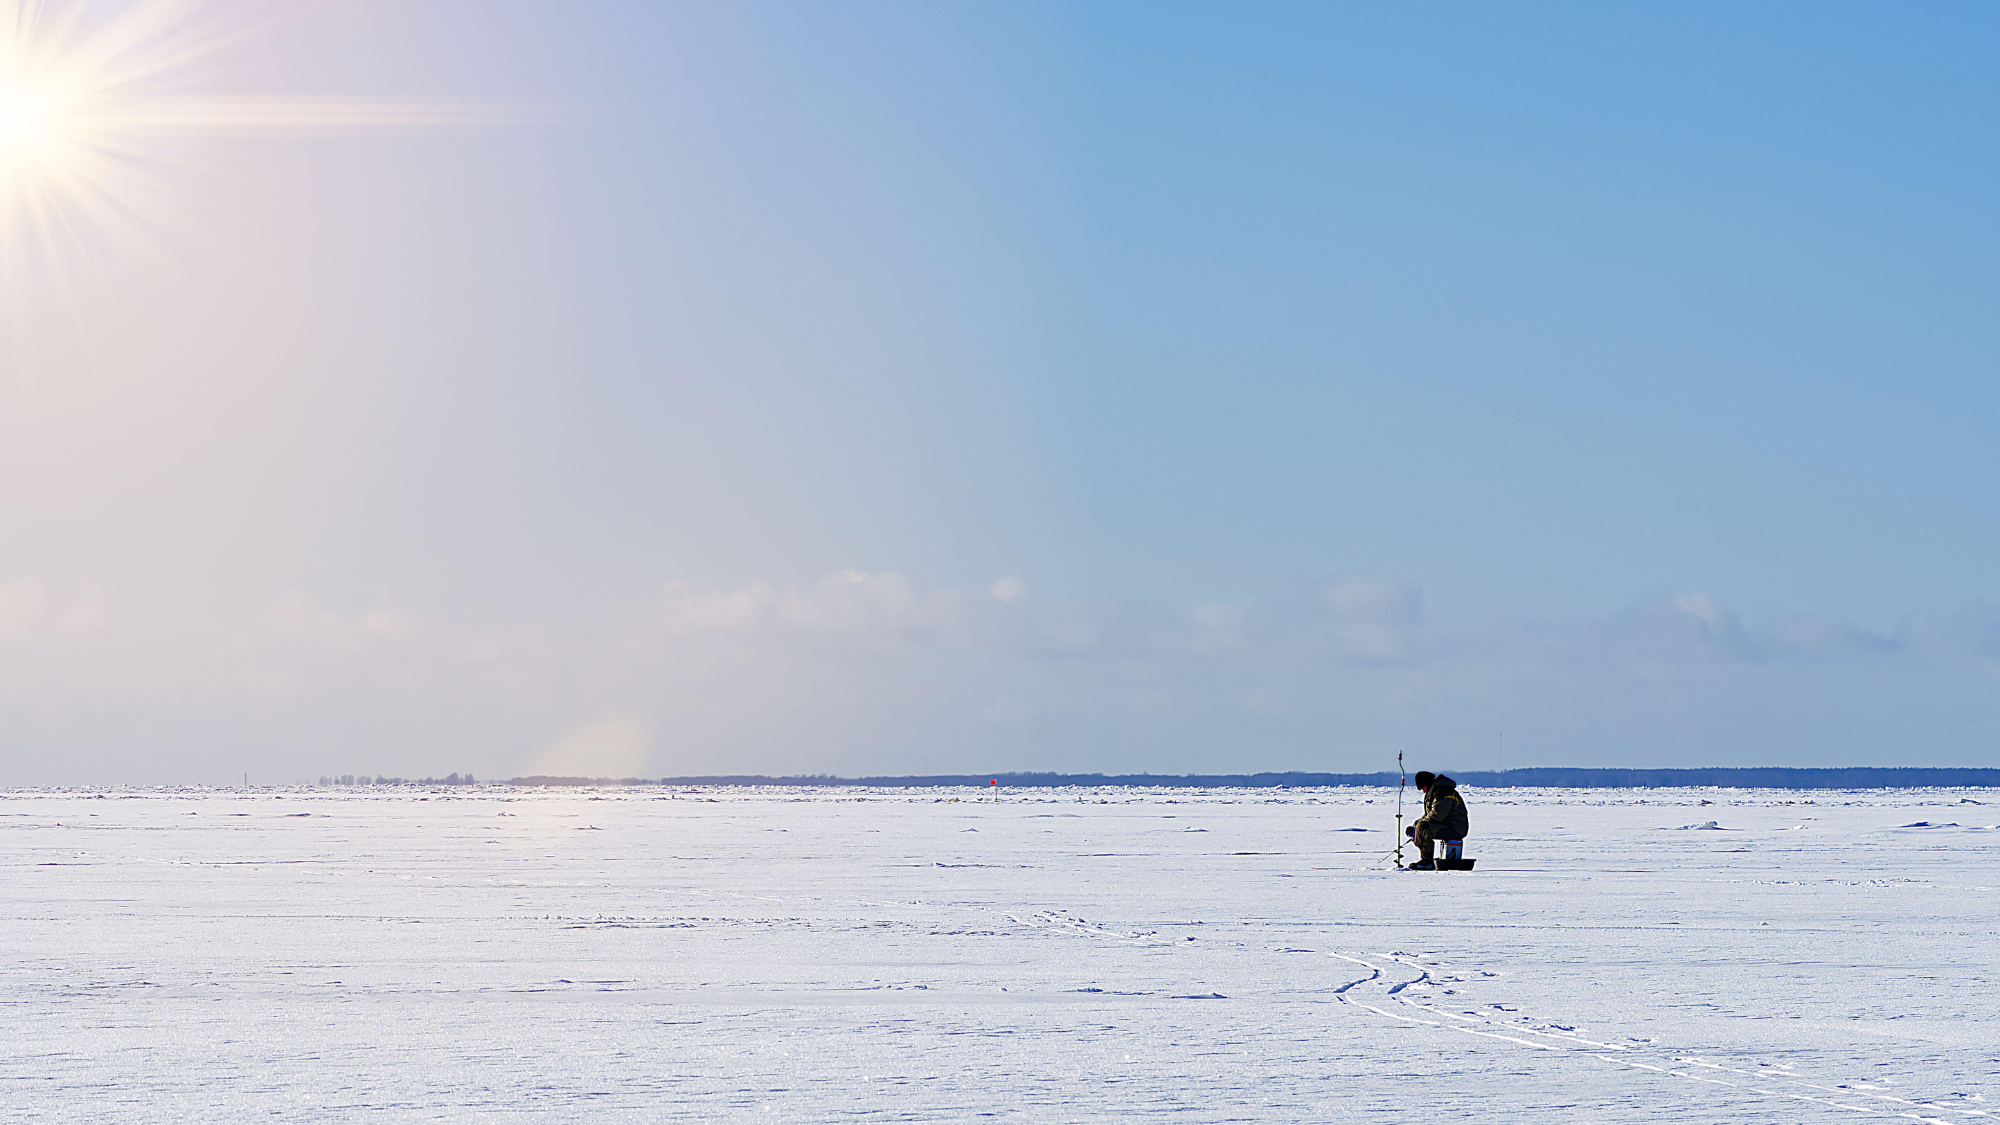 This was a fly fisherman's foray into ice fishing